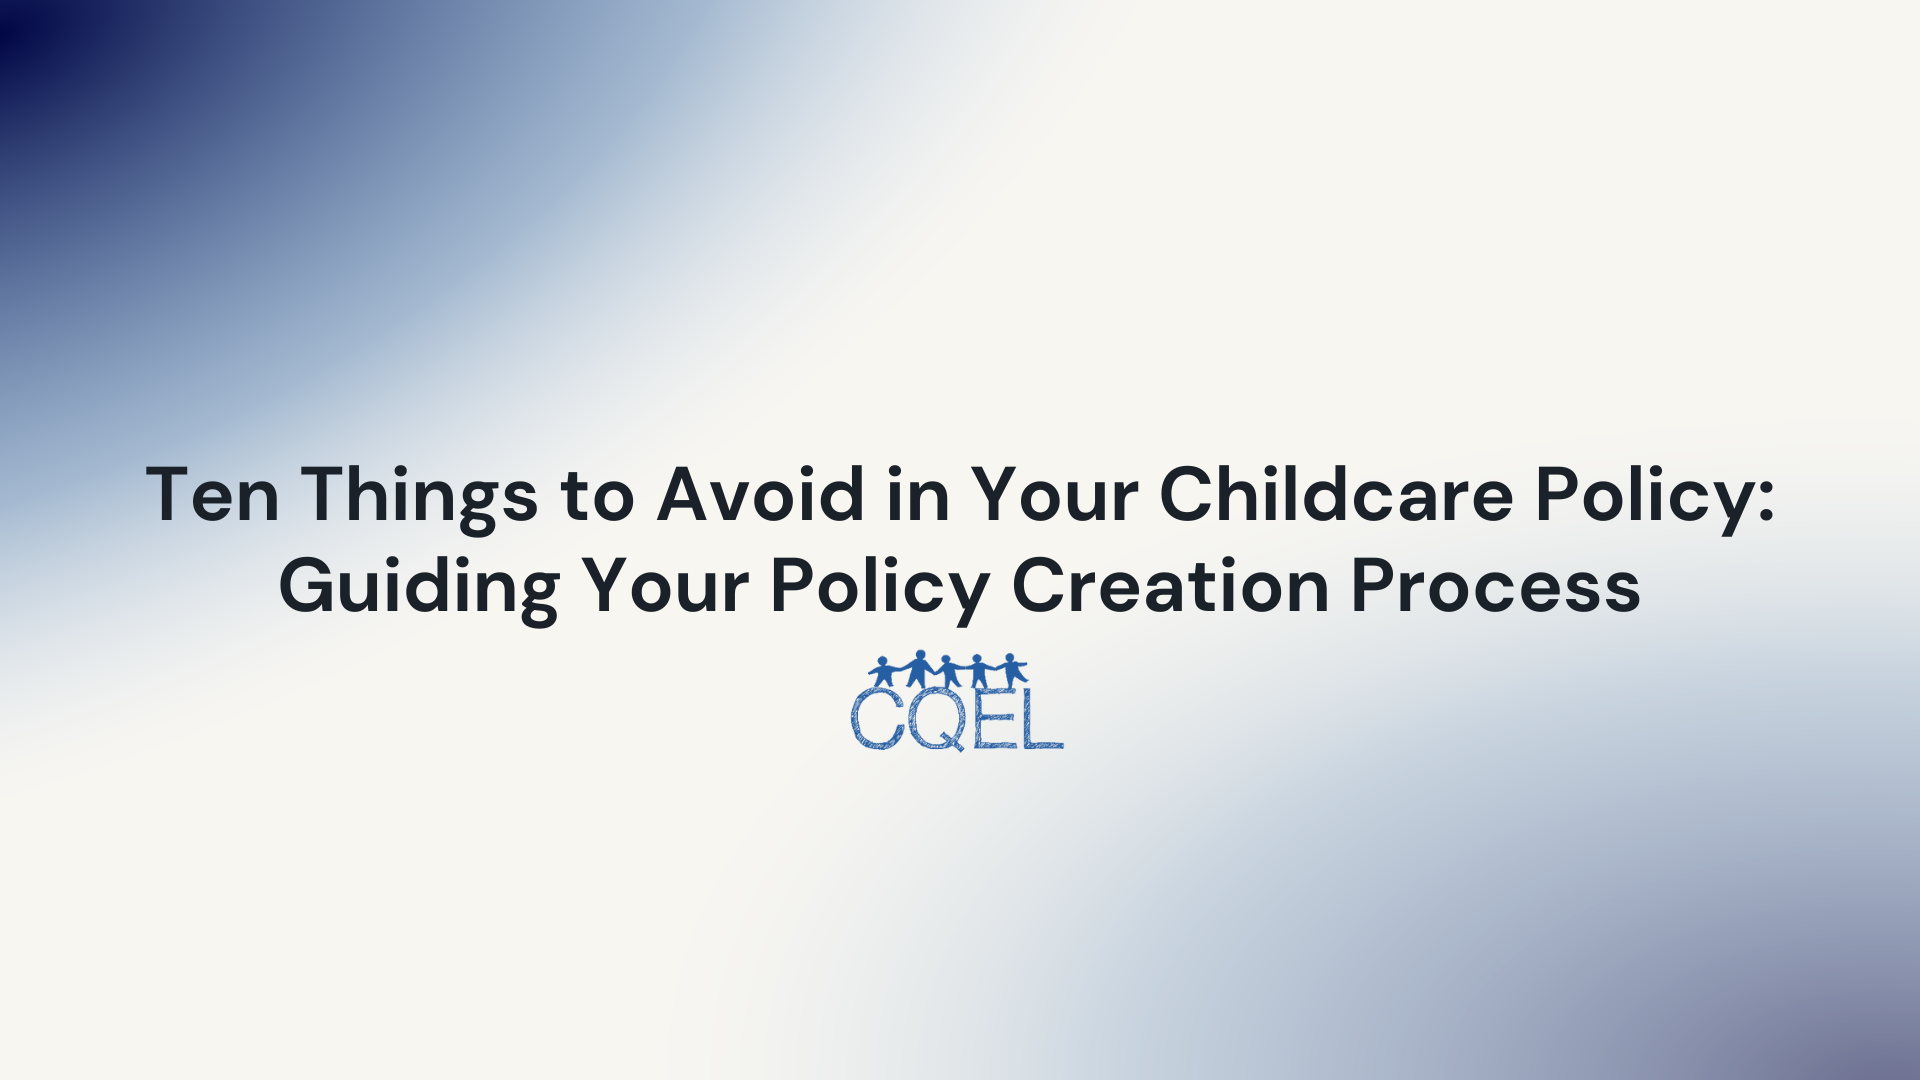 Ten Things to Avoid in Your Childcare Policy: Guiding Your Policy Creation Process